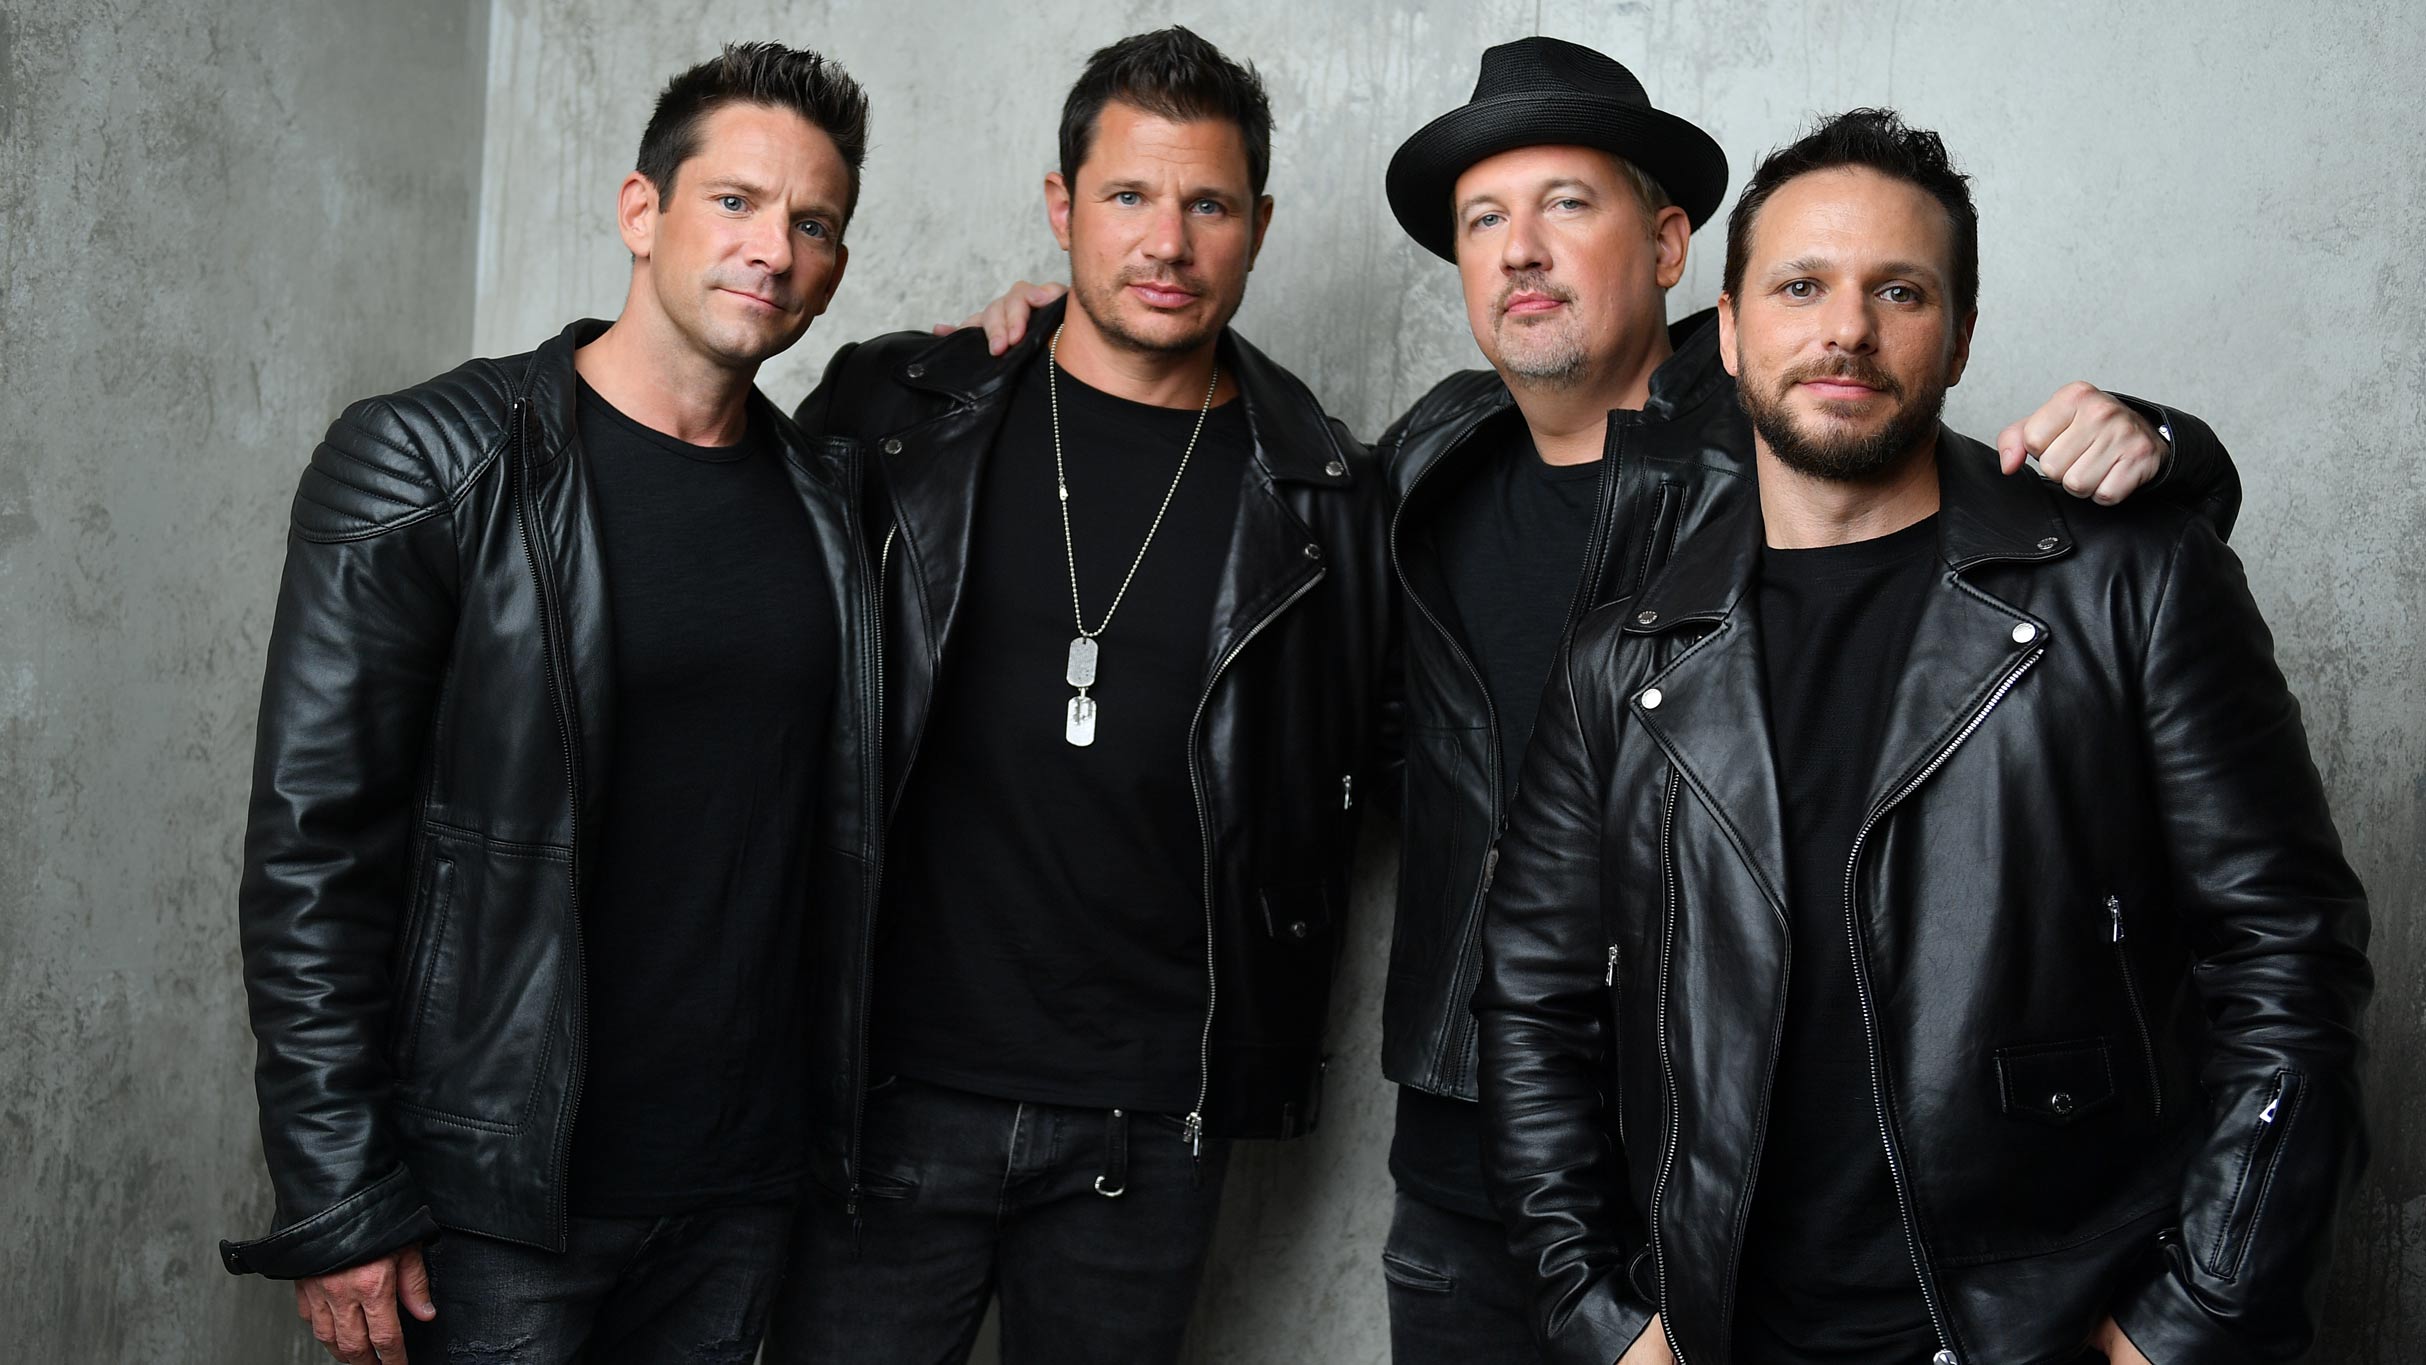 98 Degrees & Friends at Neal S Blaisdell Arena